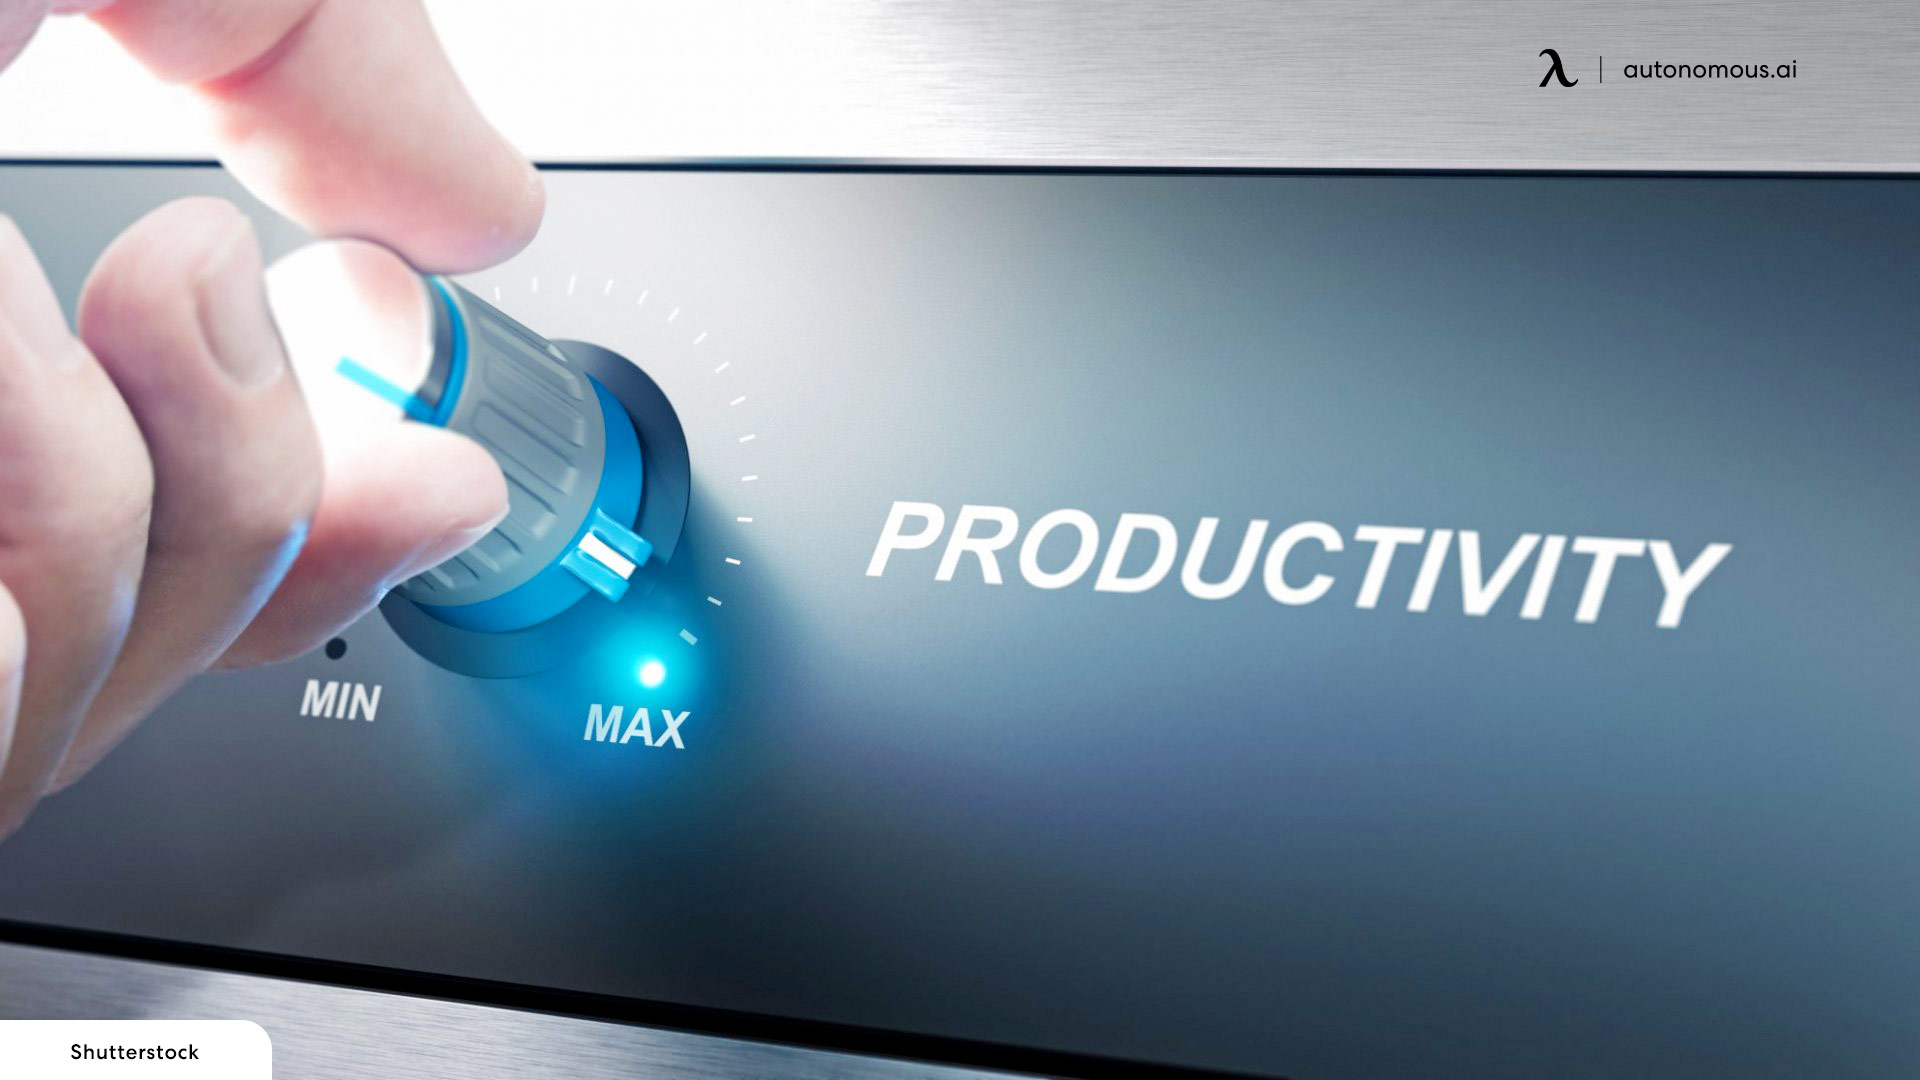 Enhanced Productivity in clean workplace